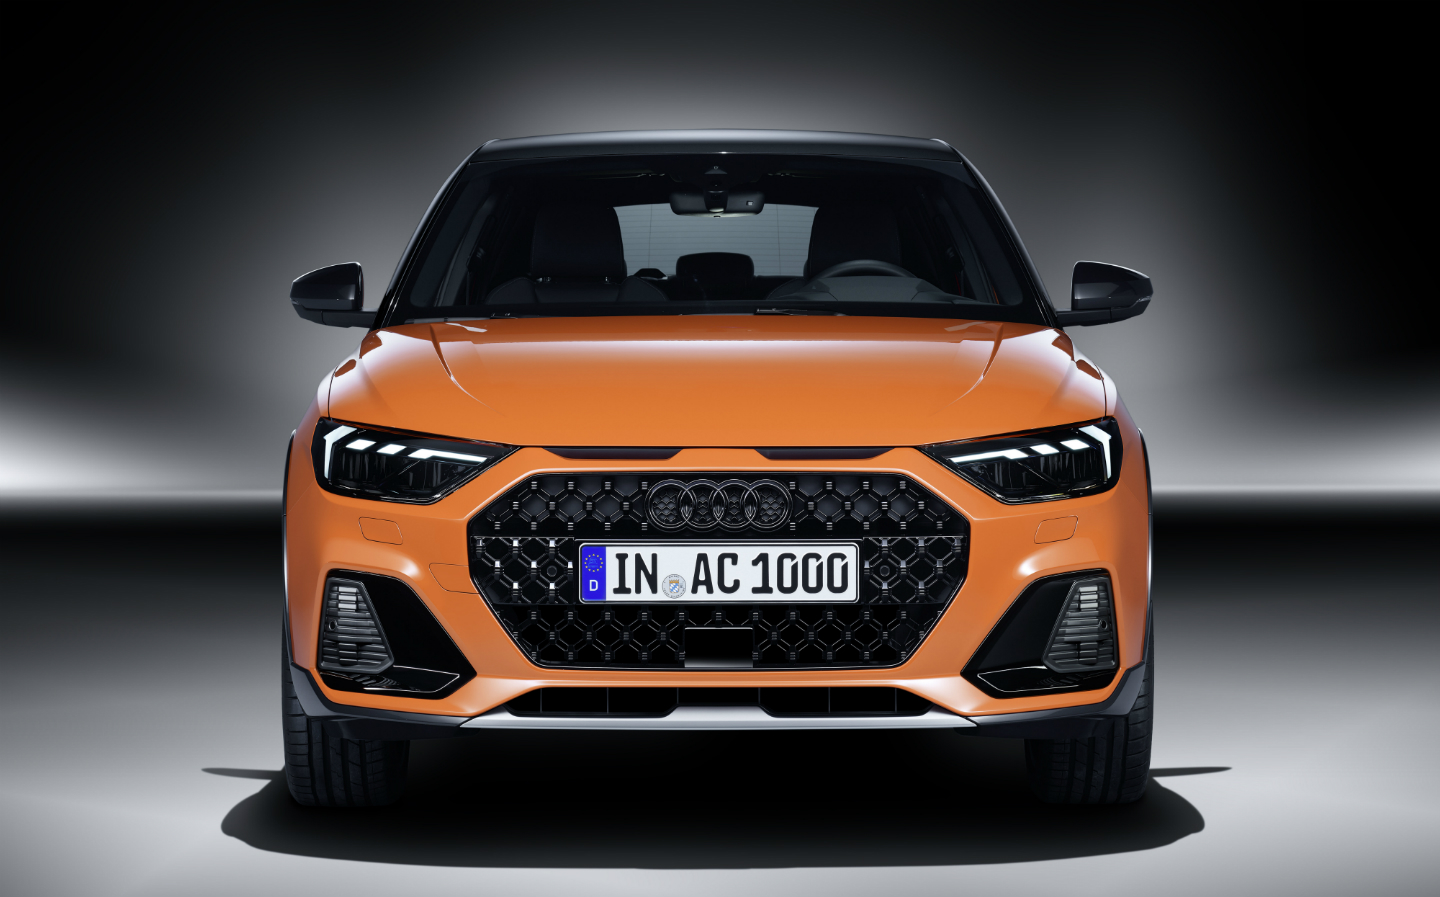 2019 Audi A1 Citycarver: engines, practicality, prices and release date